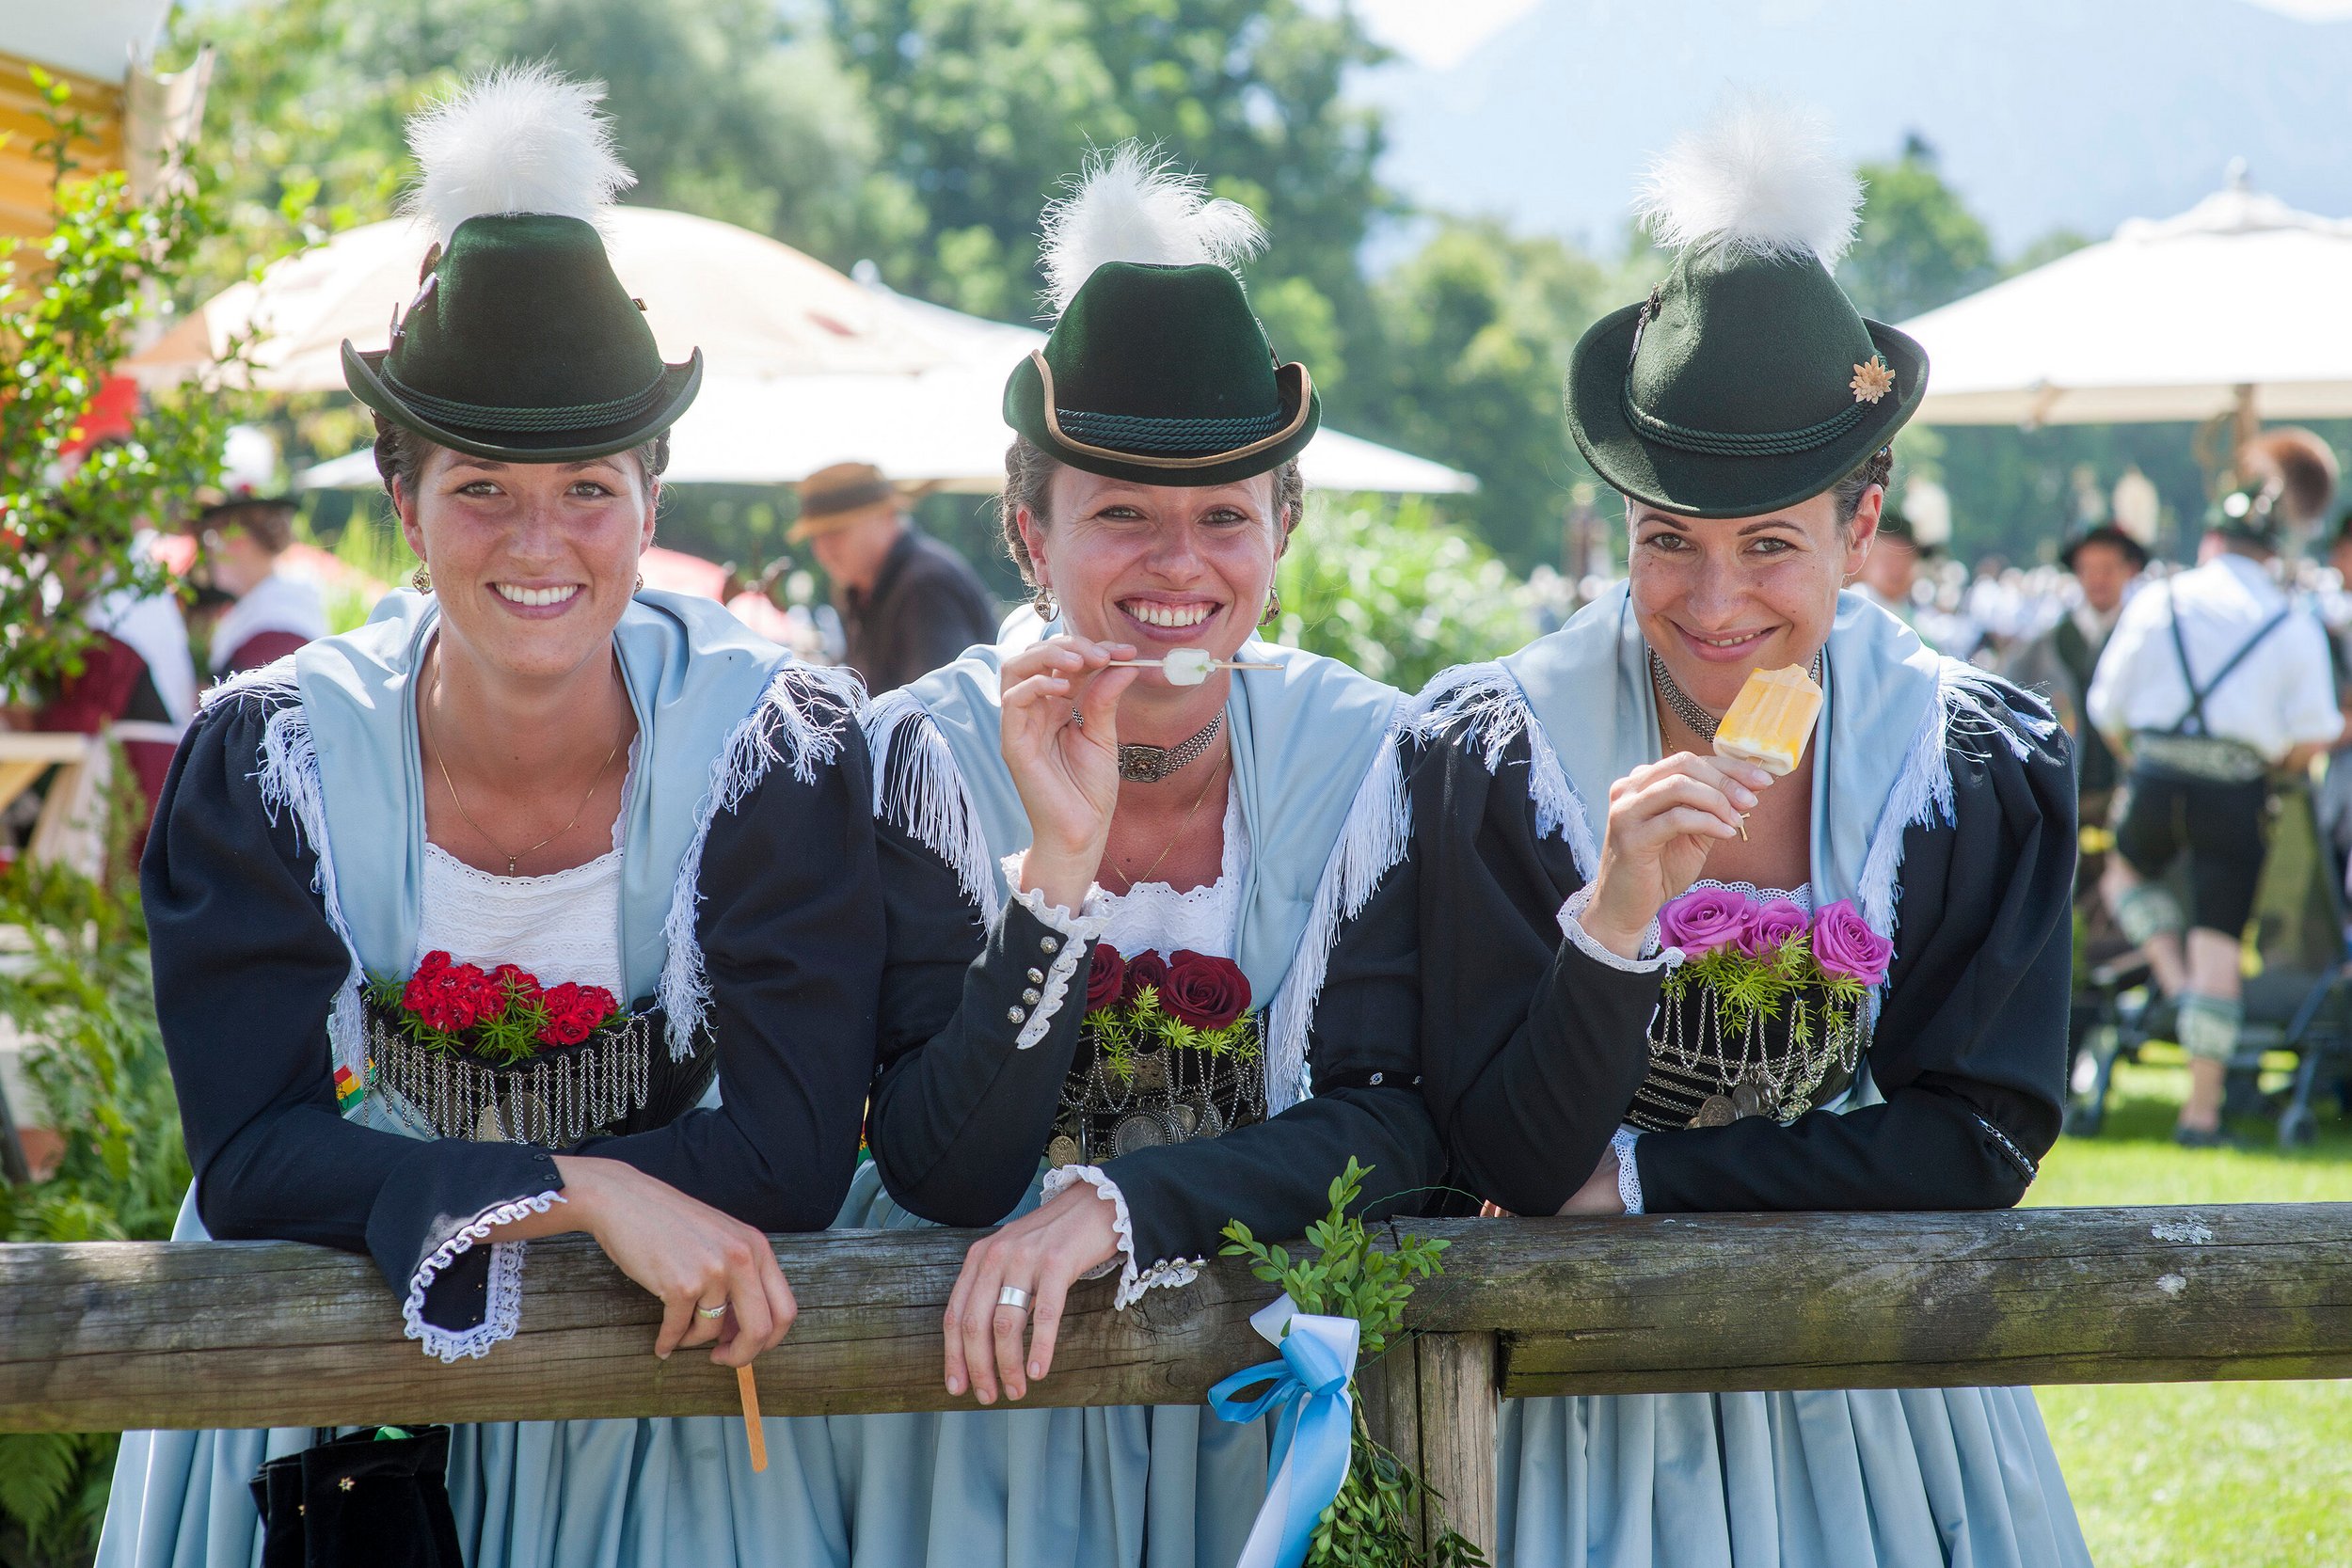 Ladies in costume after a parade in Chiemgau